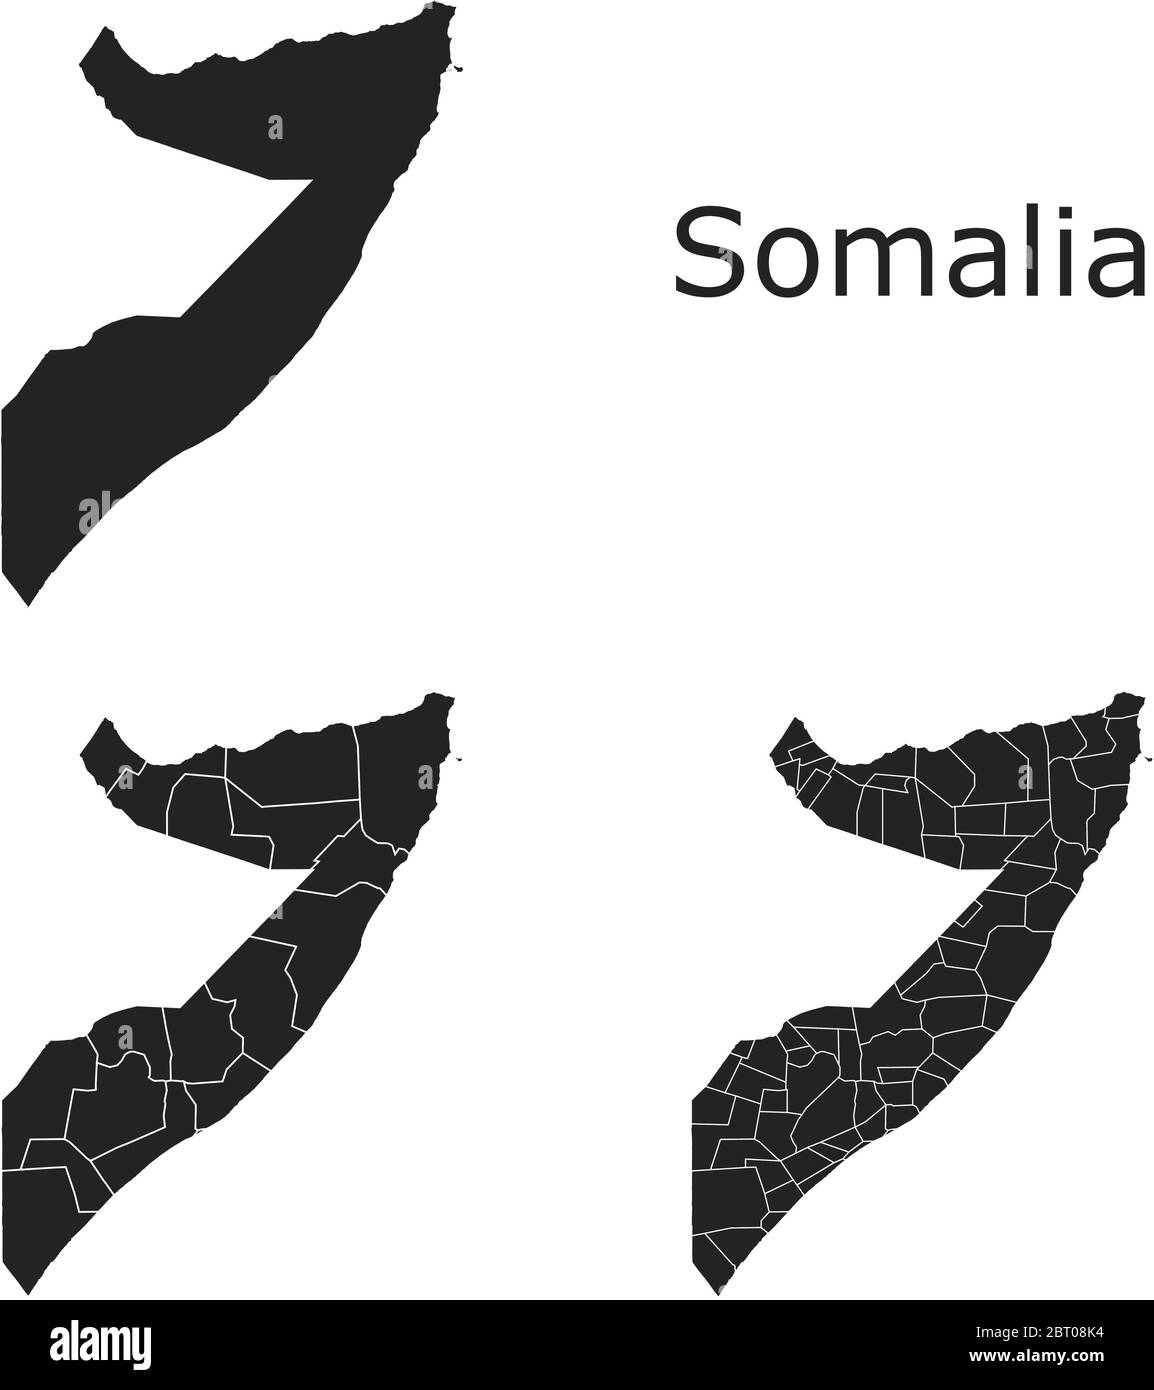 Somalia vector maps with administrative regions, municipalities, departments, borders Stock Vector